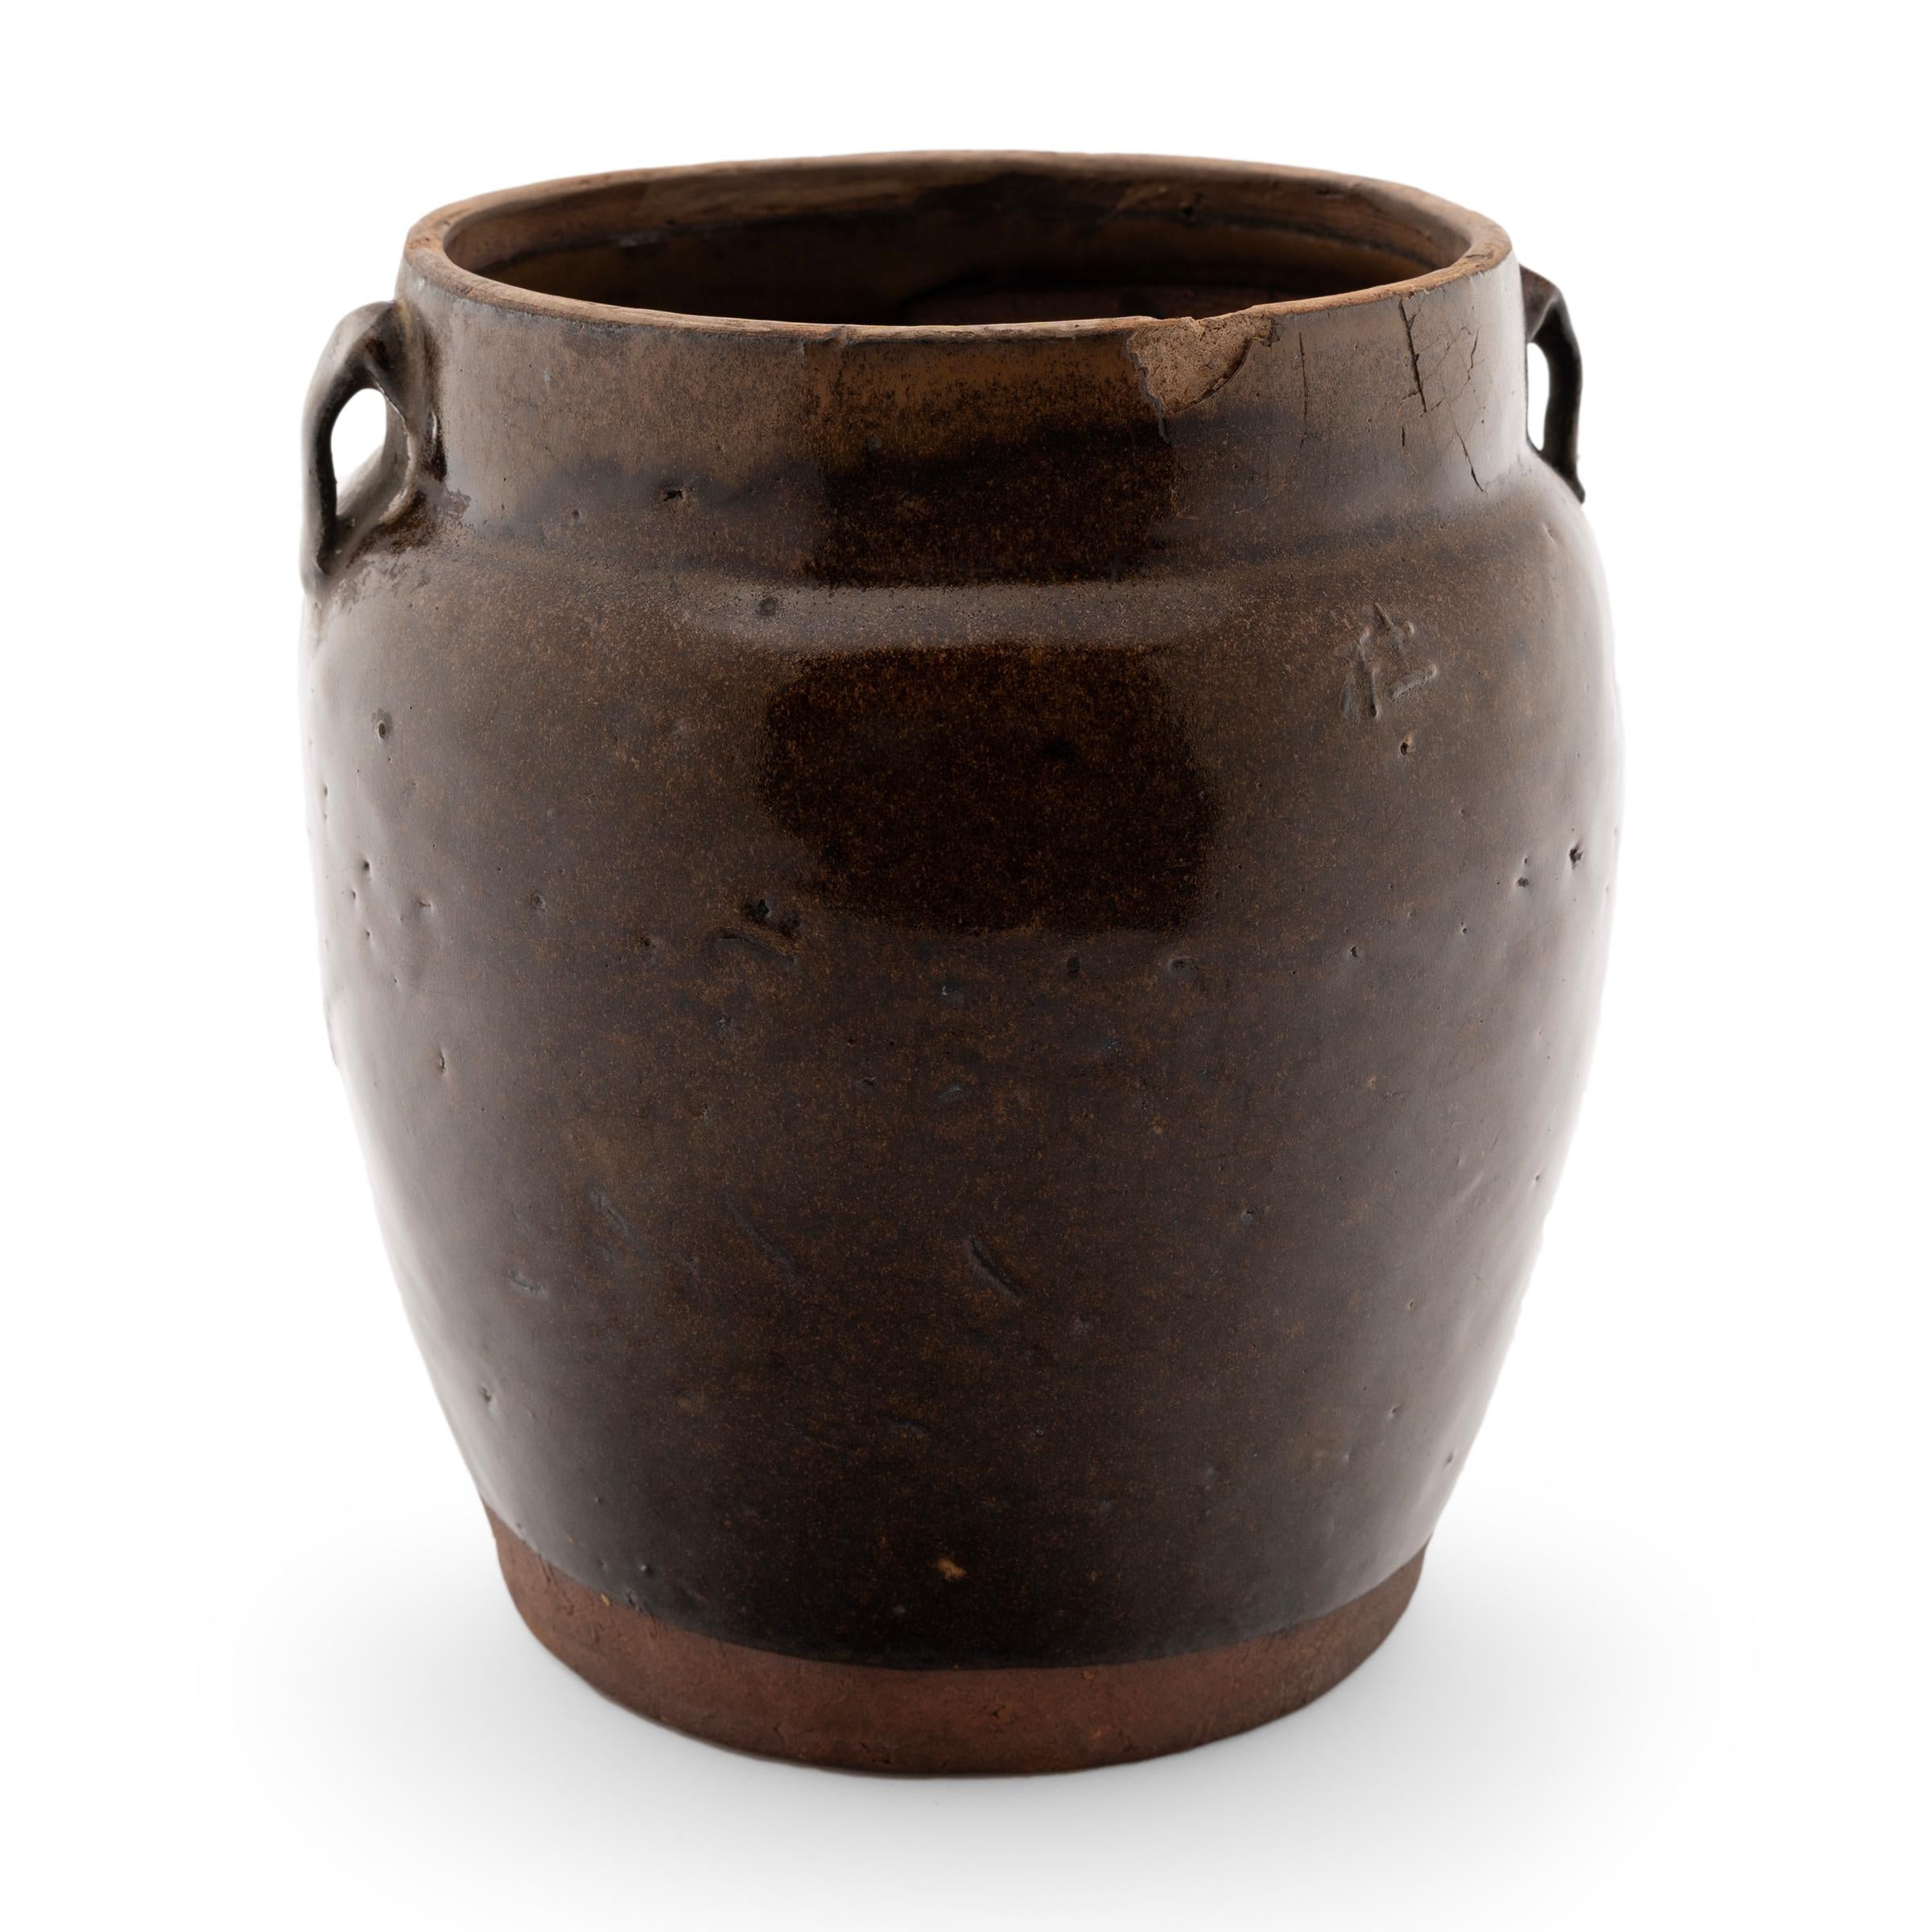 As evidenced by the interior glaze, this wide-mouth jar was once used in a Provincial Qing-dynasty kitchen for storing food and condiments. The vessel has a gently tapered form, with sloped shoulders, small strap handles and a defined, straight